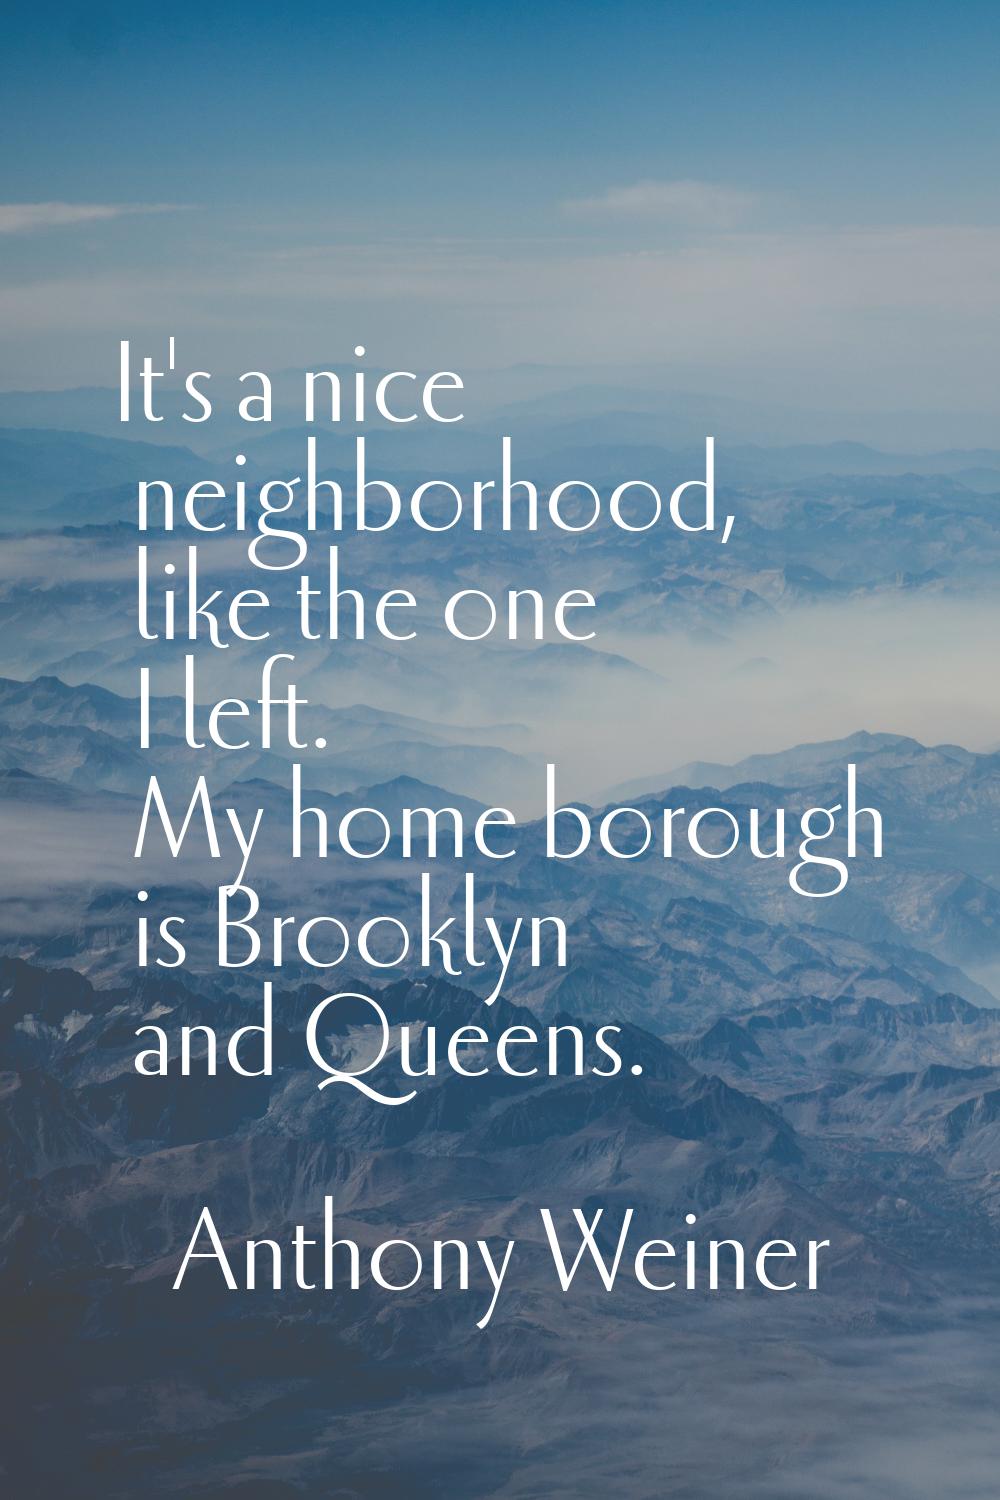 It's a nice neighborhood, like the one I left. My home borough is Brooklyn and Queens.